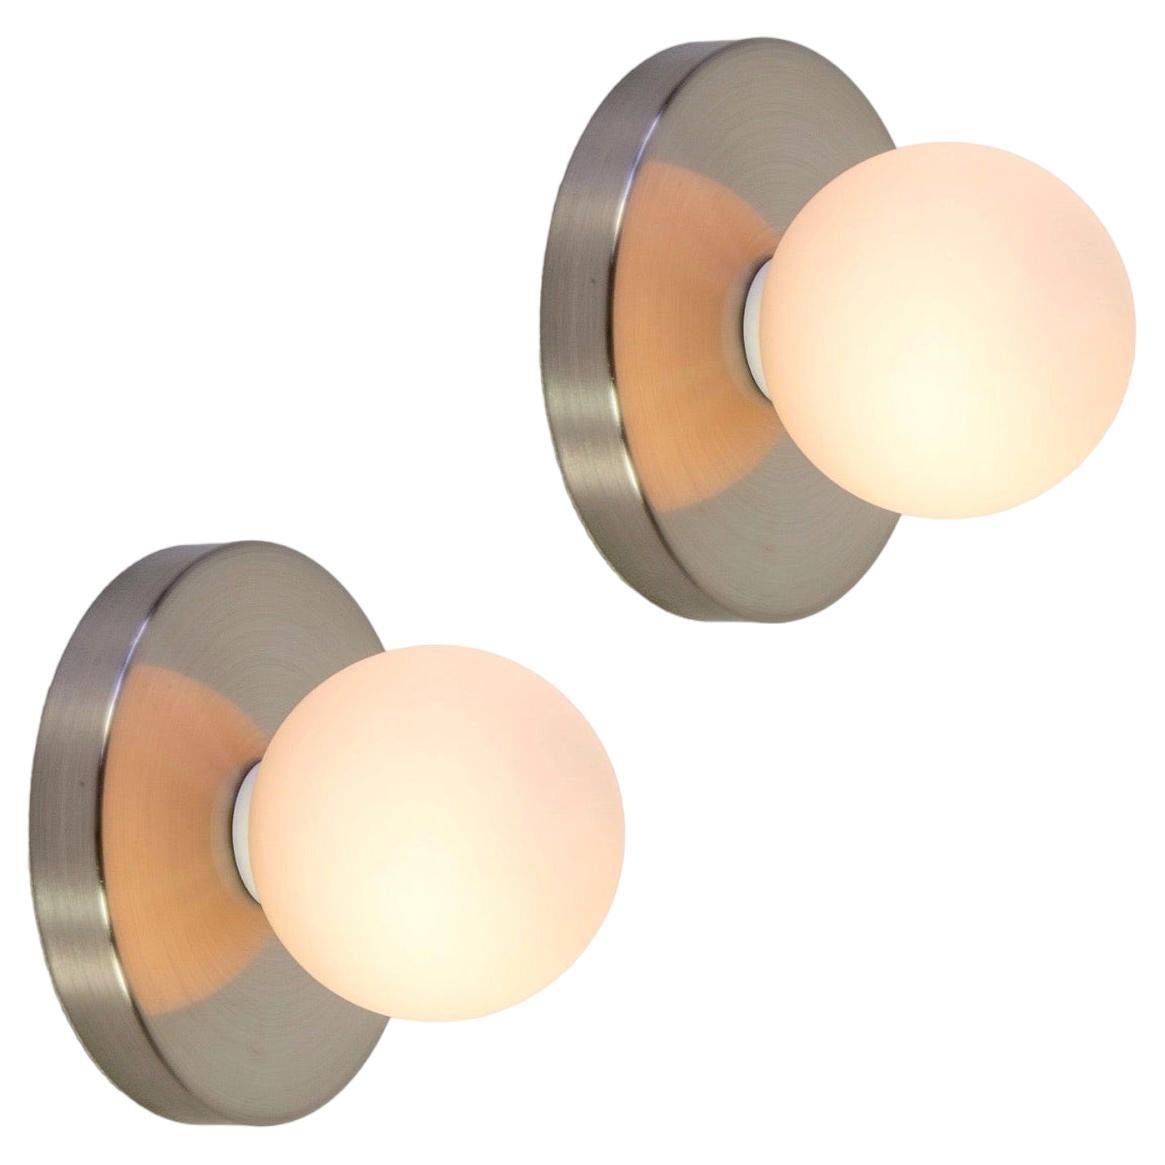 Pair of Globe Sconces by Research.Lighting, Brushed Nickel, In Stock